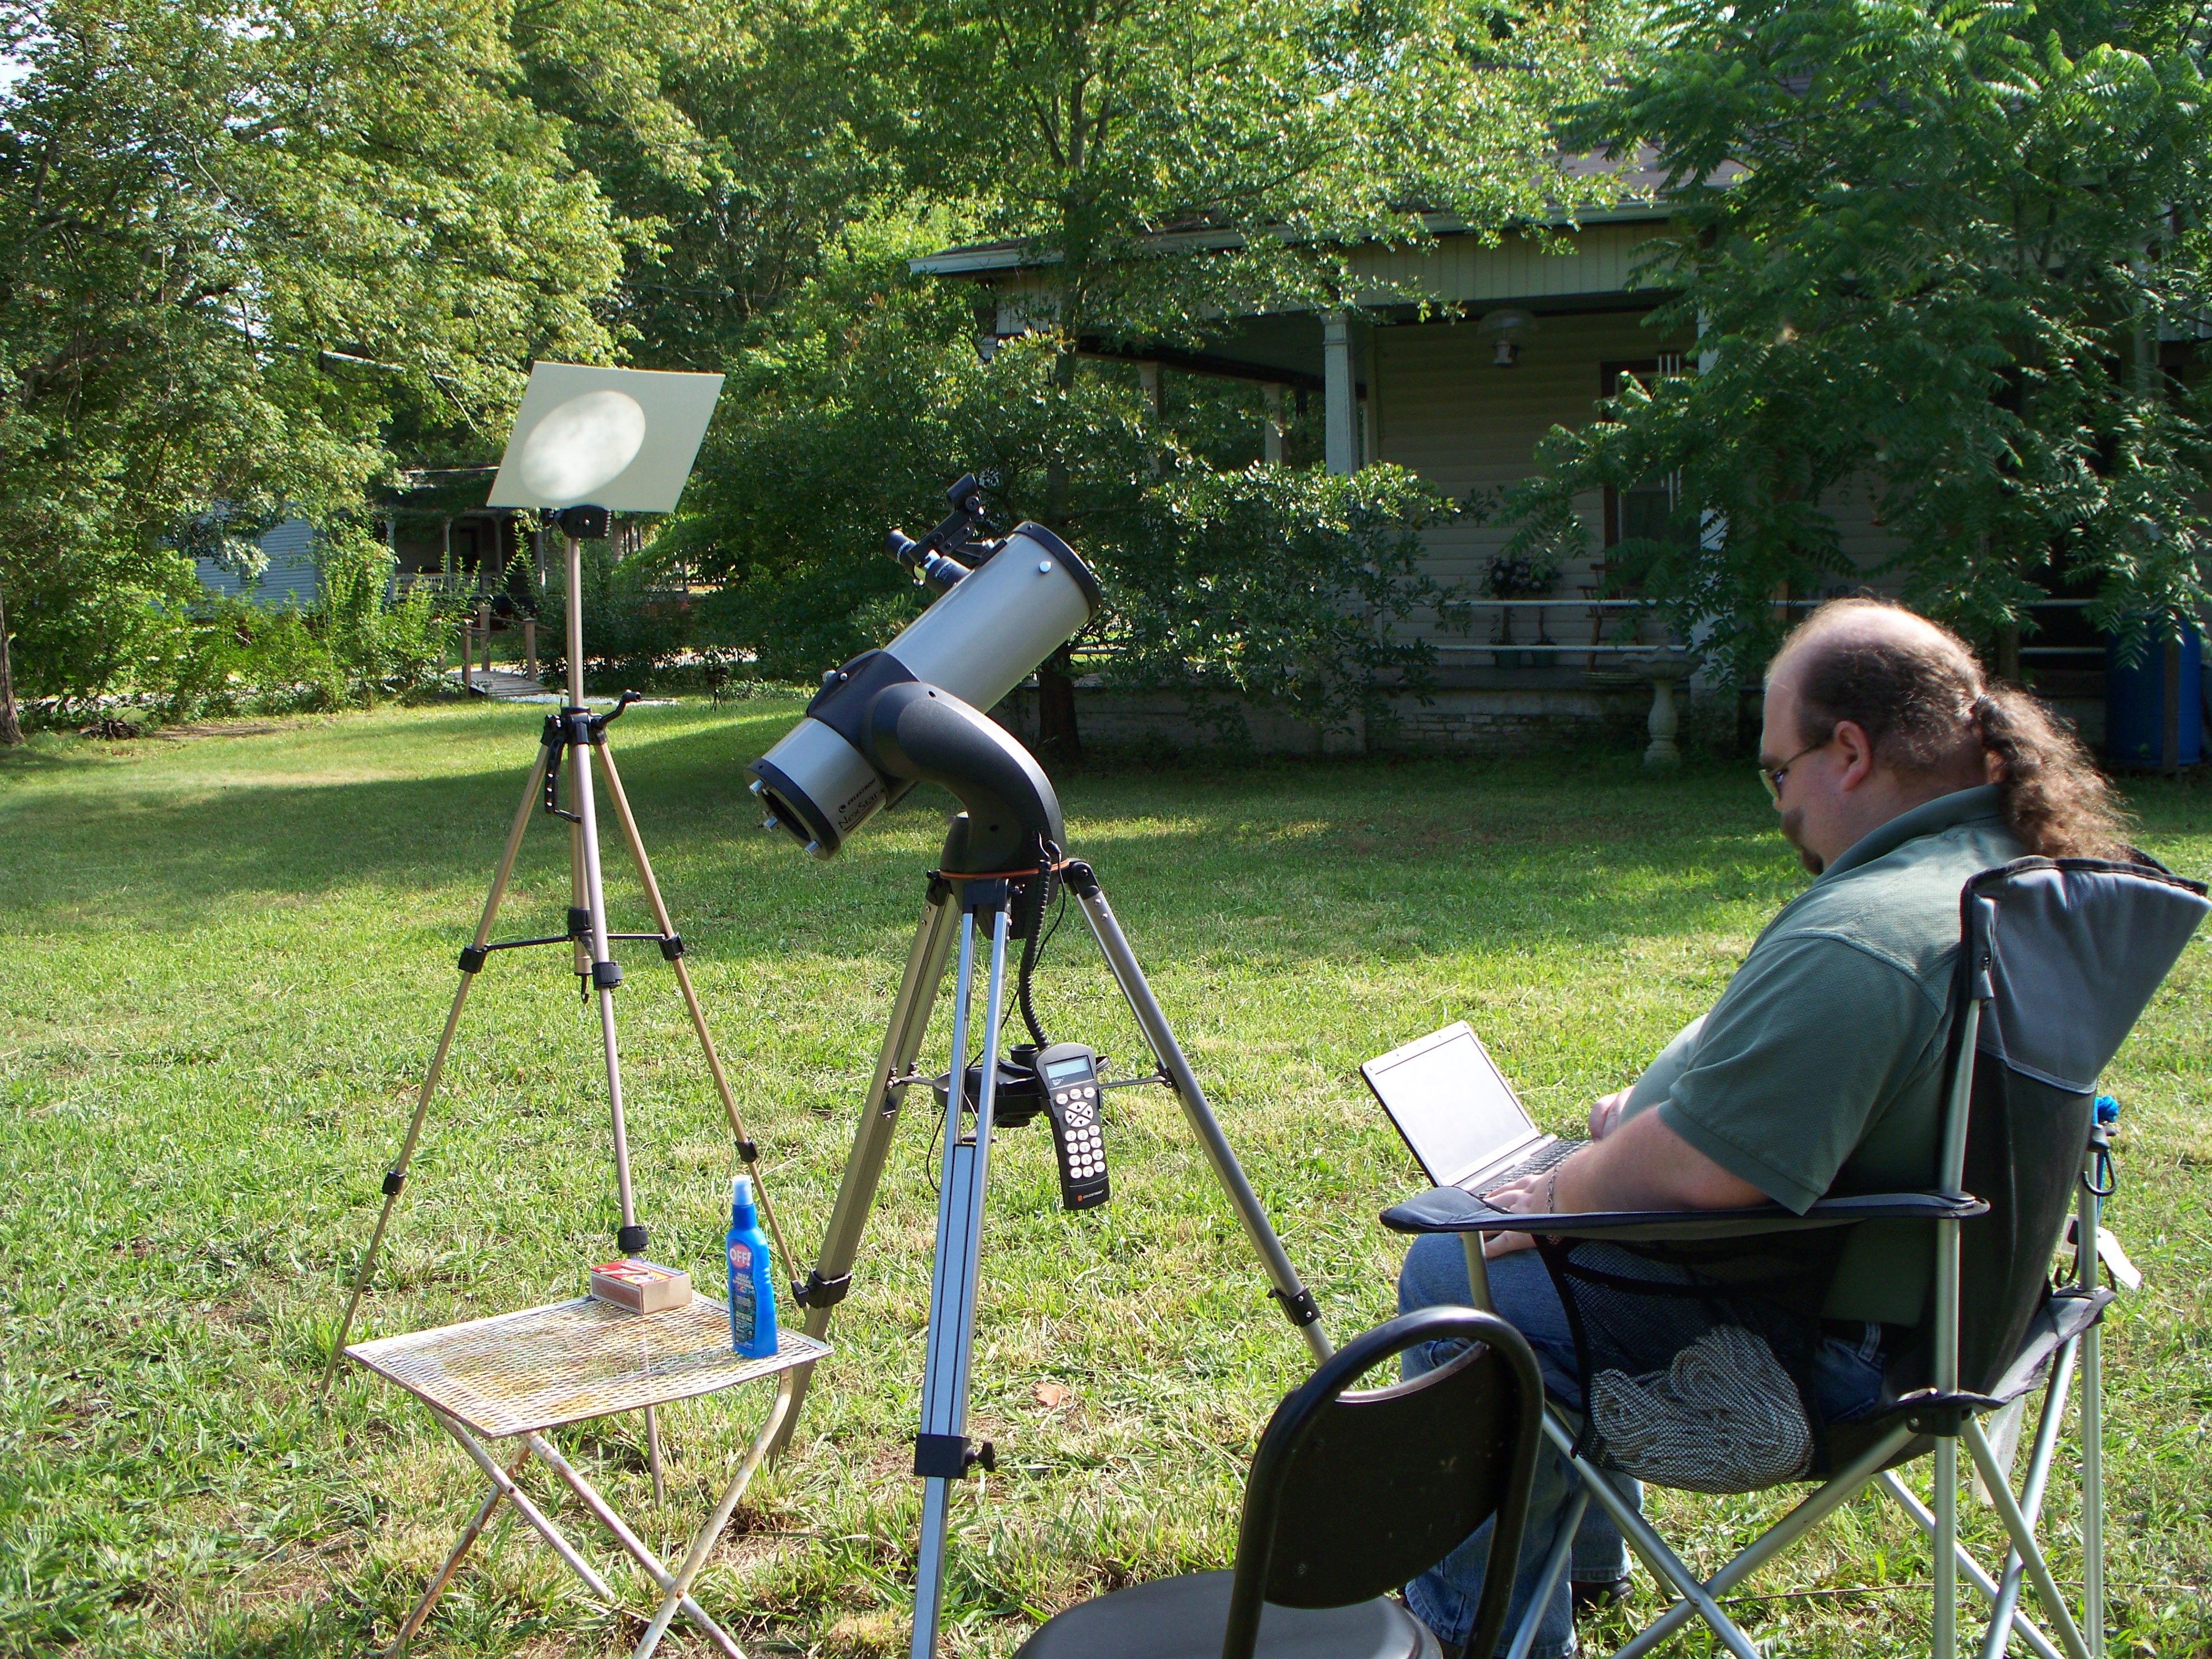 Geof streaming the NASA Edge broadcast and using twitter on the netbook while the telescope projects an image of the sun on a piece of white posterboard.